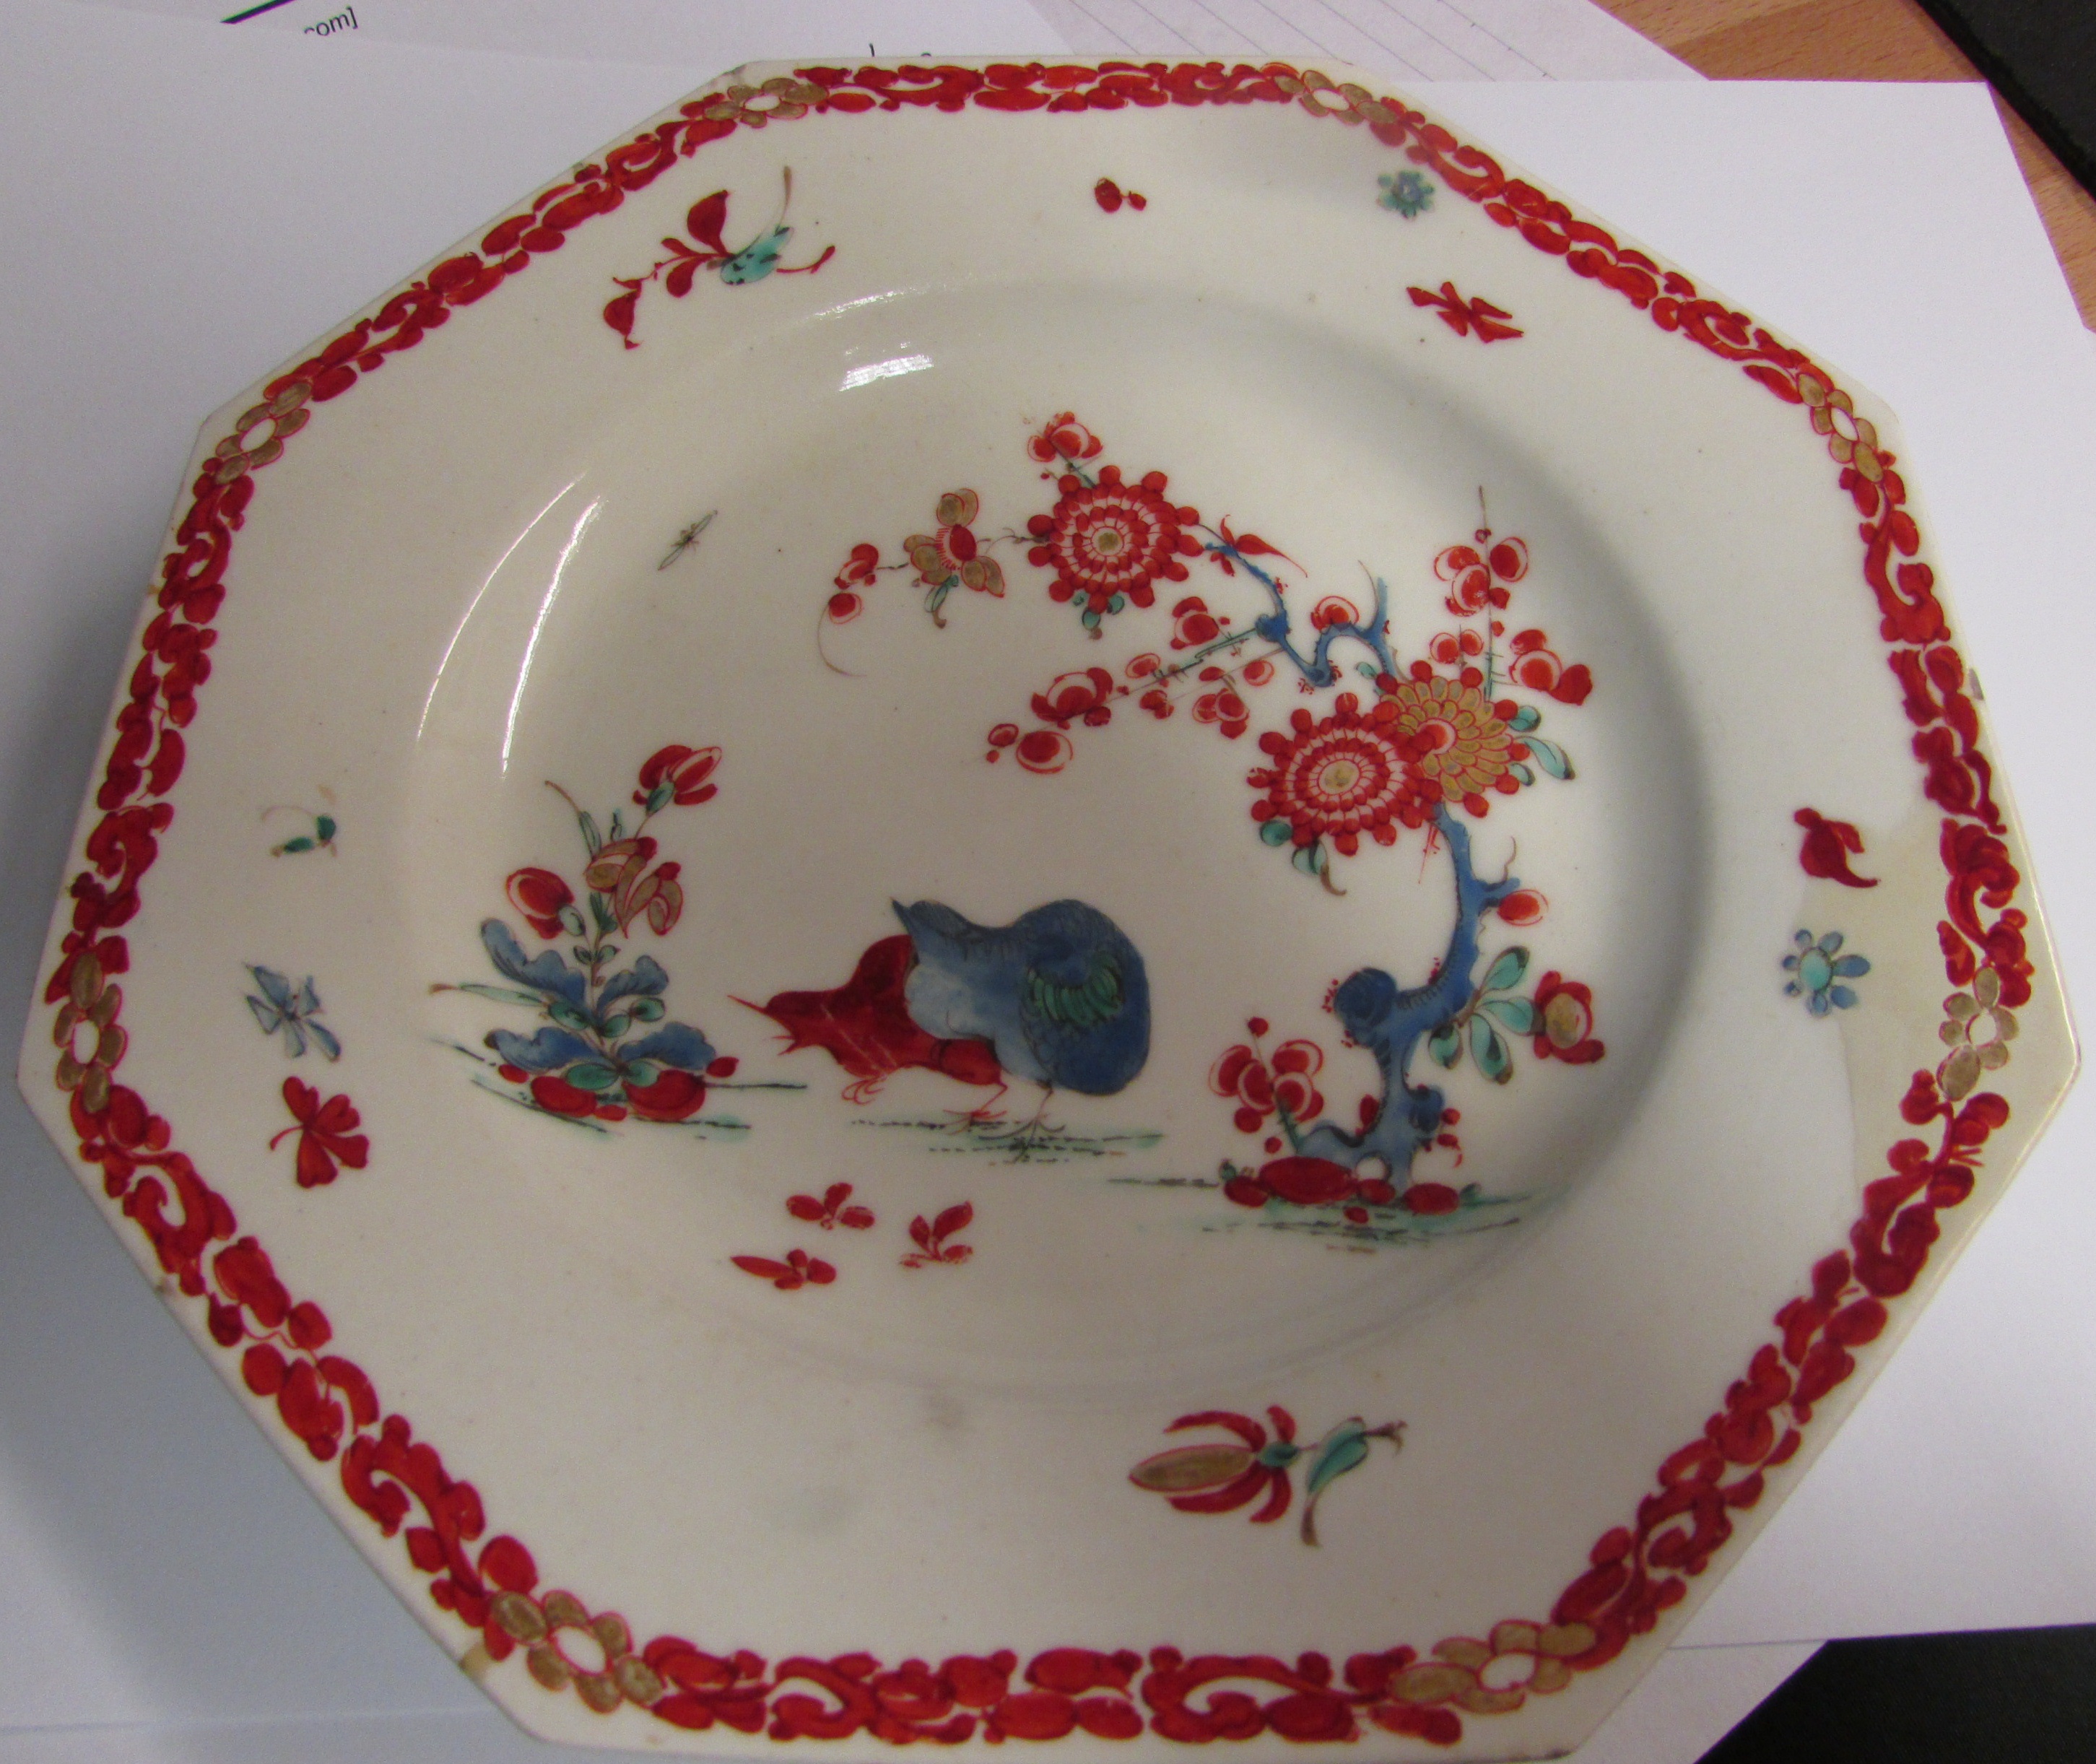 English porcelain hexagonal plate, painted with the quail pattern in the Kakiemon style, perhaps